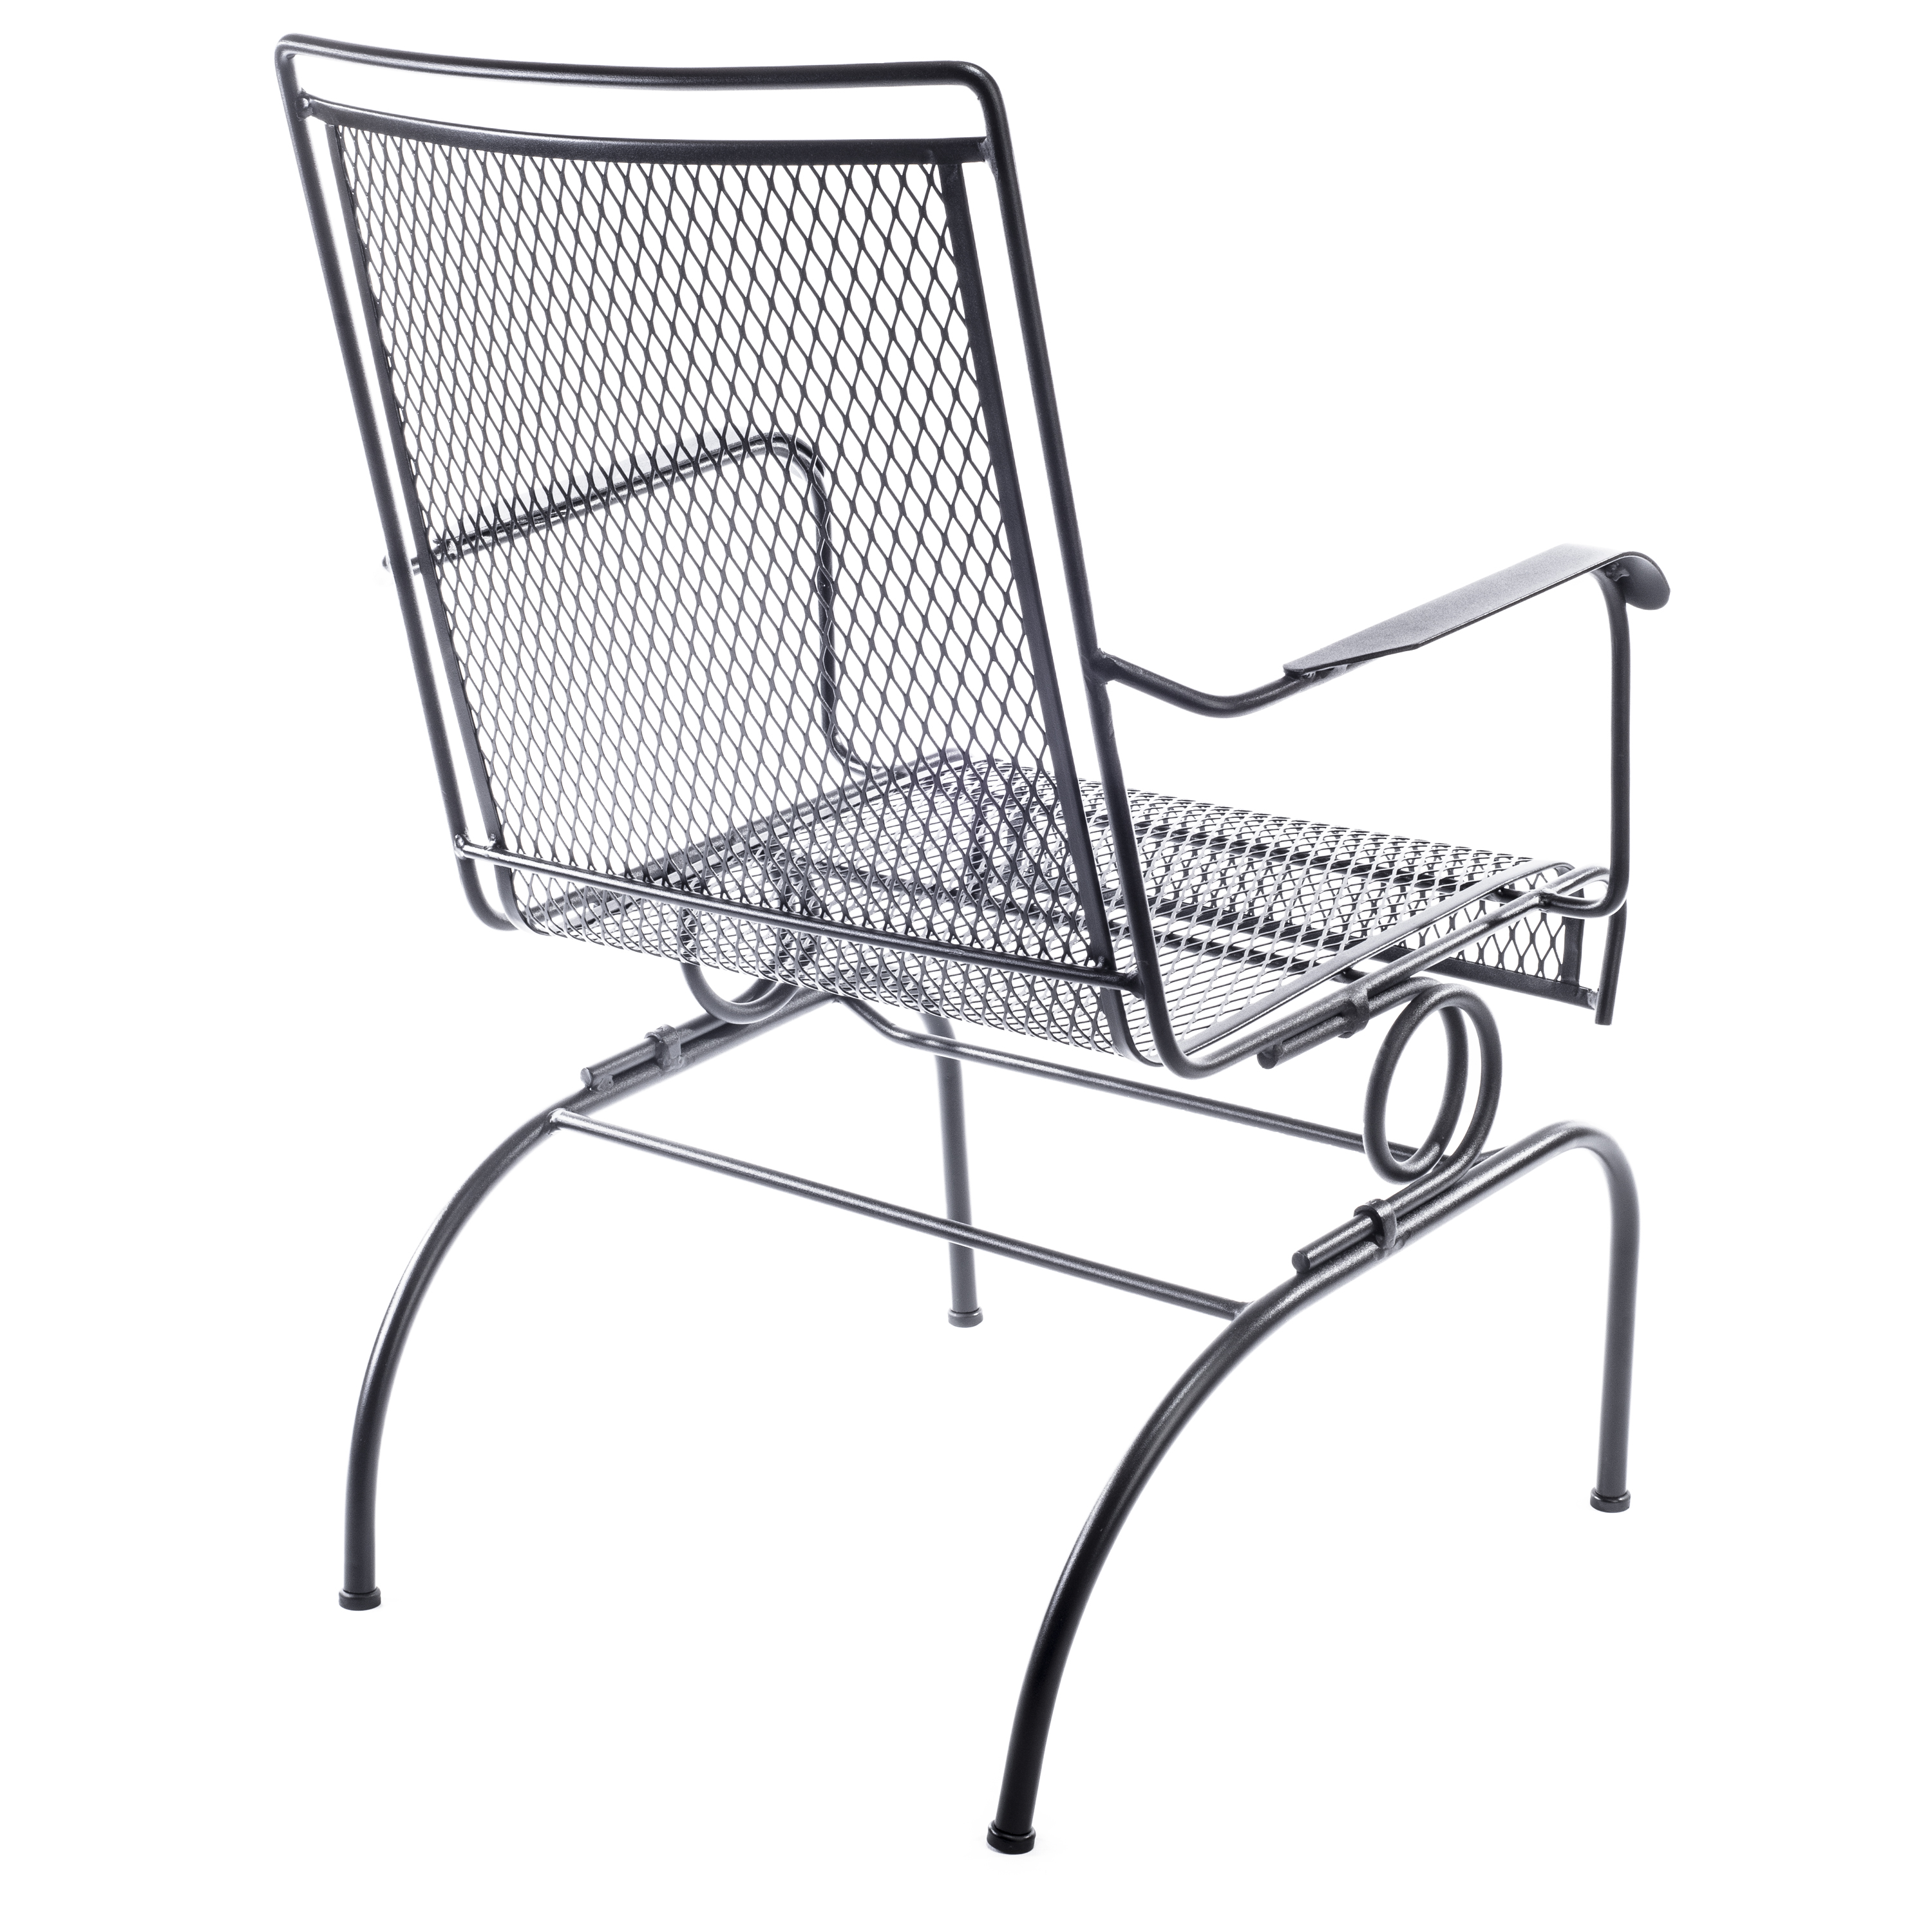 Arlington House Wrought Iron Outdoor Action Dining Chair, Charcoal - image 5 of 5